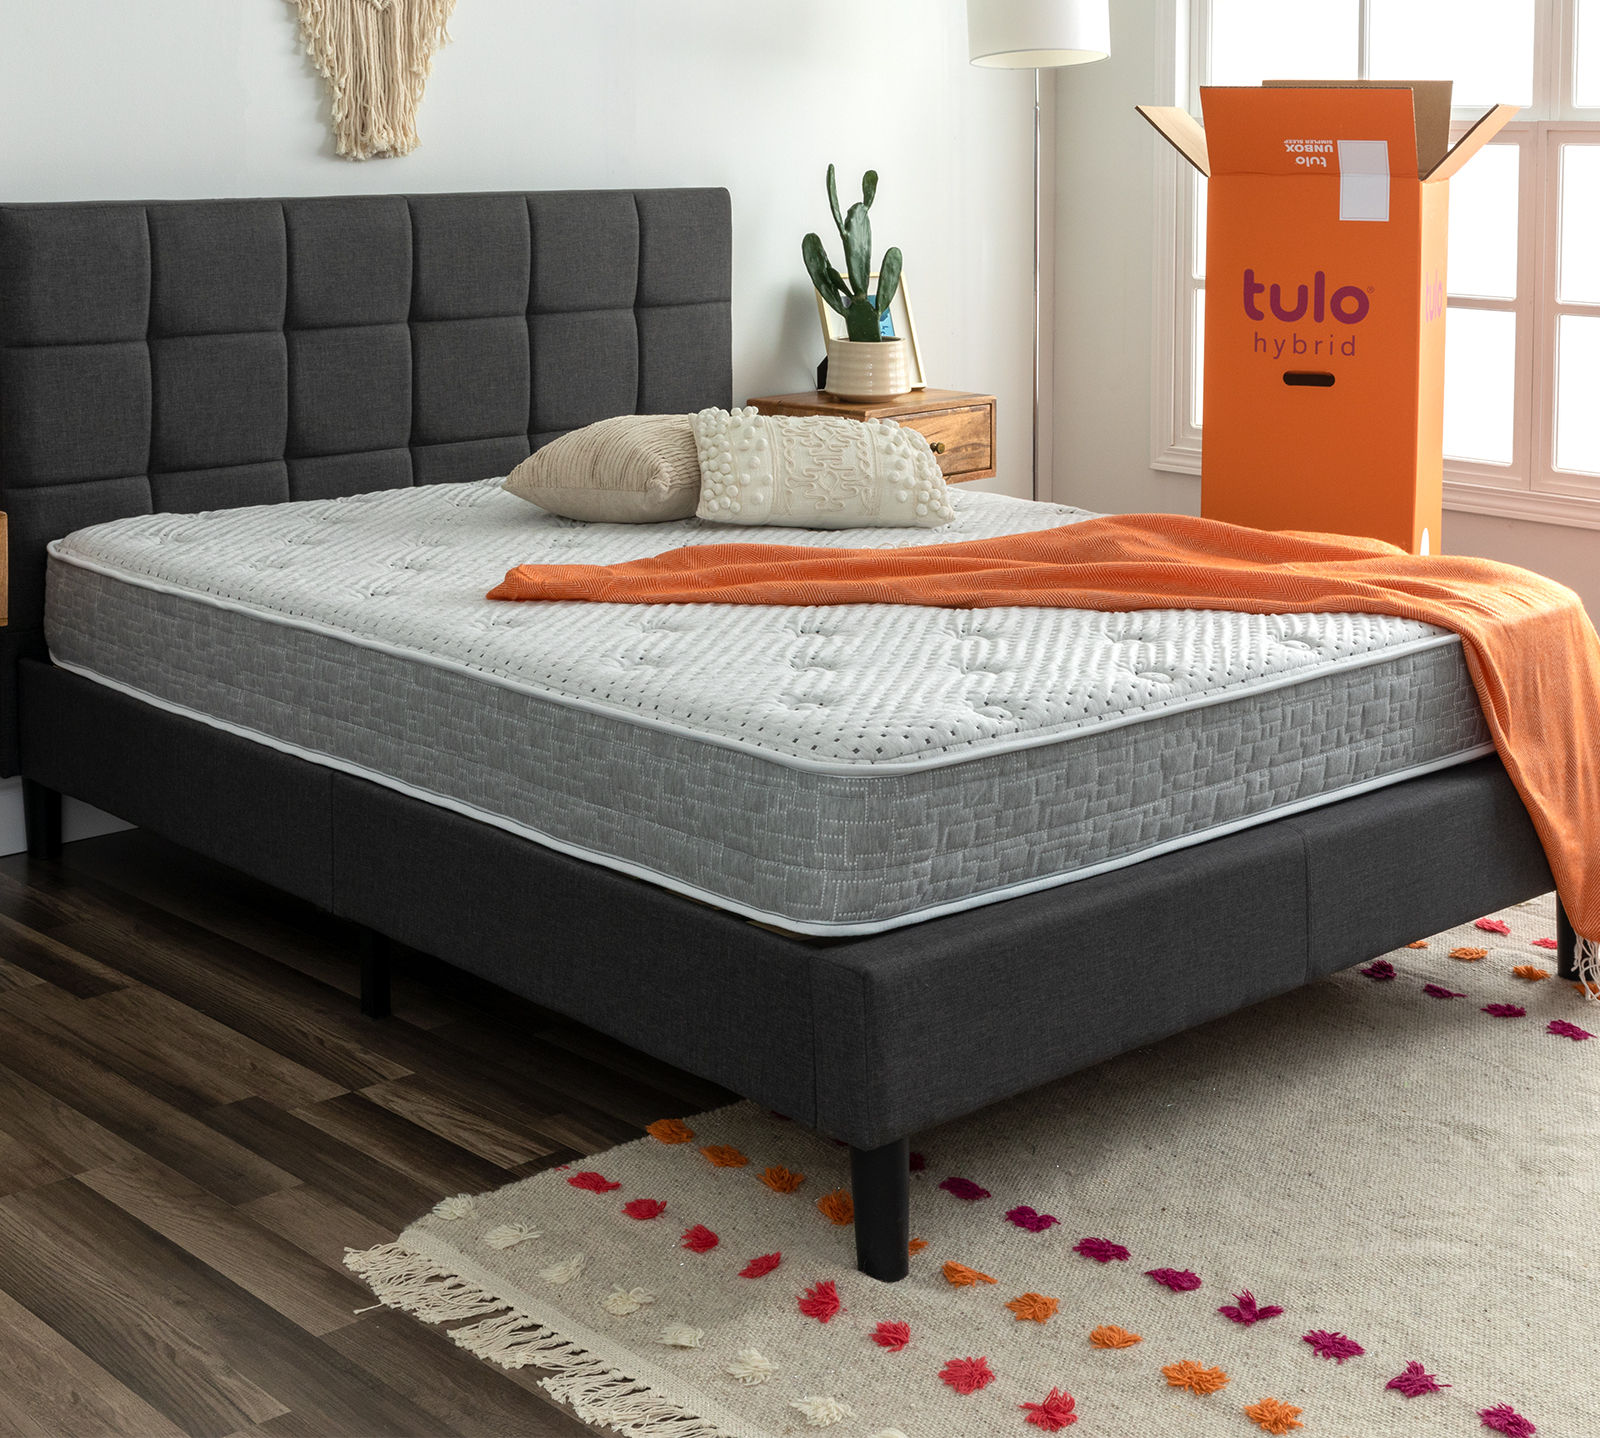 tulo Twin Extra Long Mattress | Hybrid | Firm 8